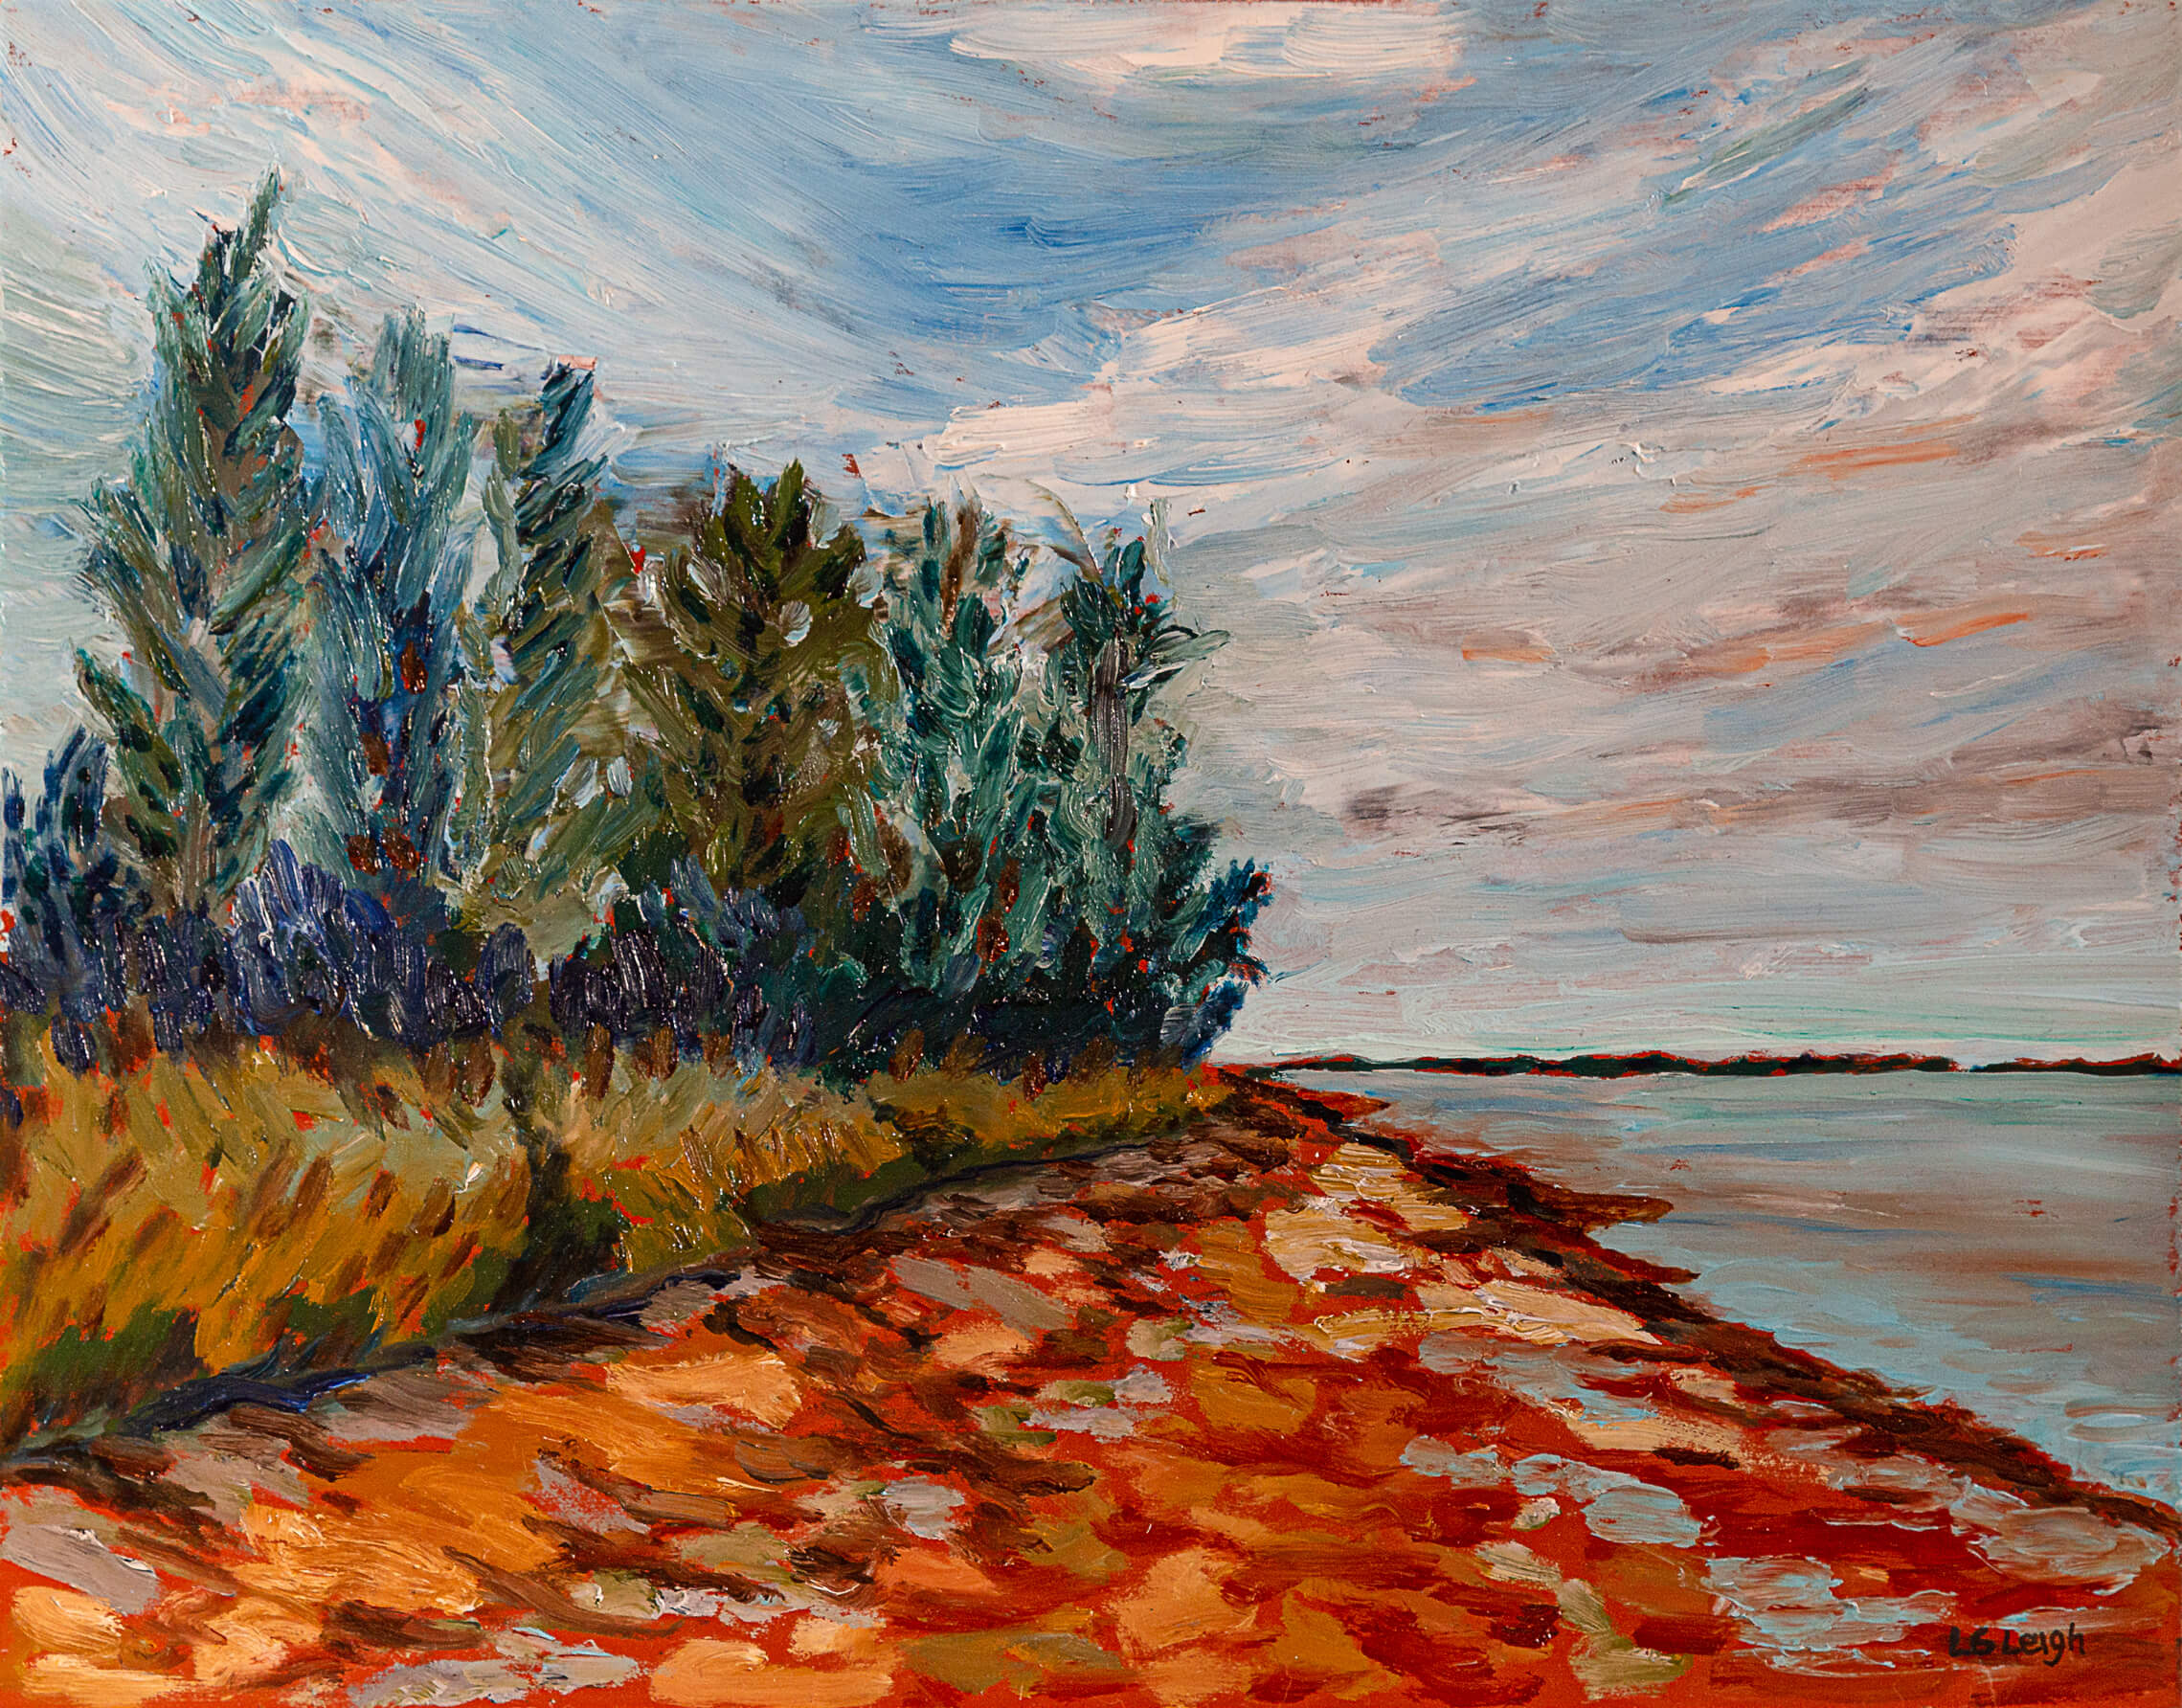 Queen's Point(N view), P.E.I. Luis Leigh Guillermo Lineage Arts Gallery Ottawa